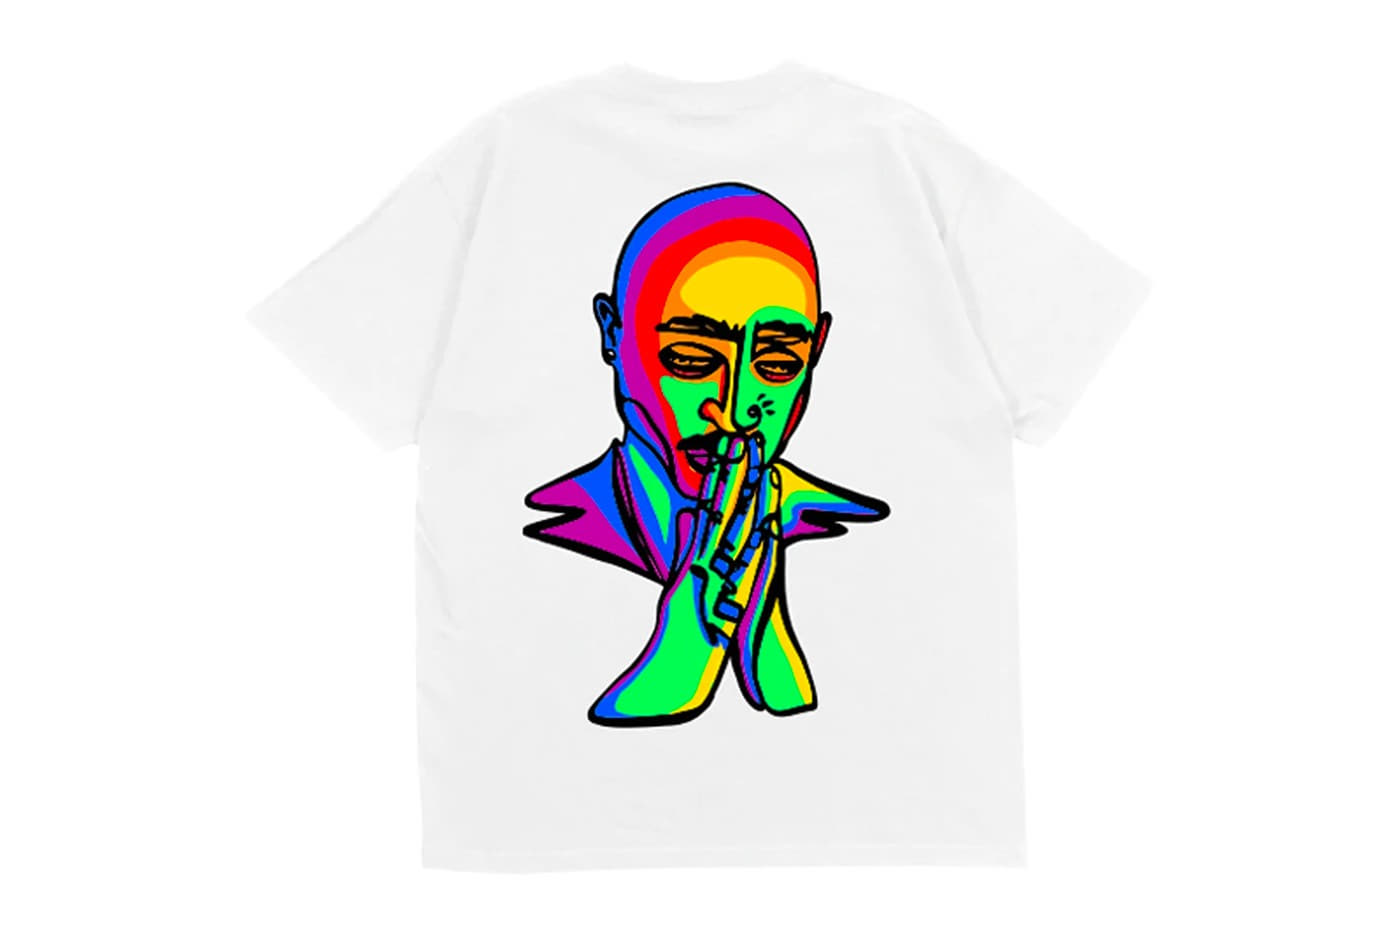 2pac-estate-pride-month-merch-collection-release-info-005.jpg